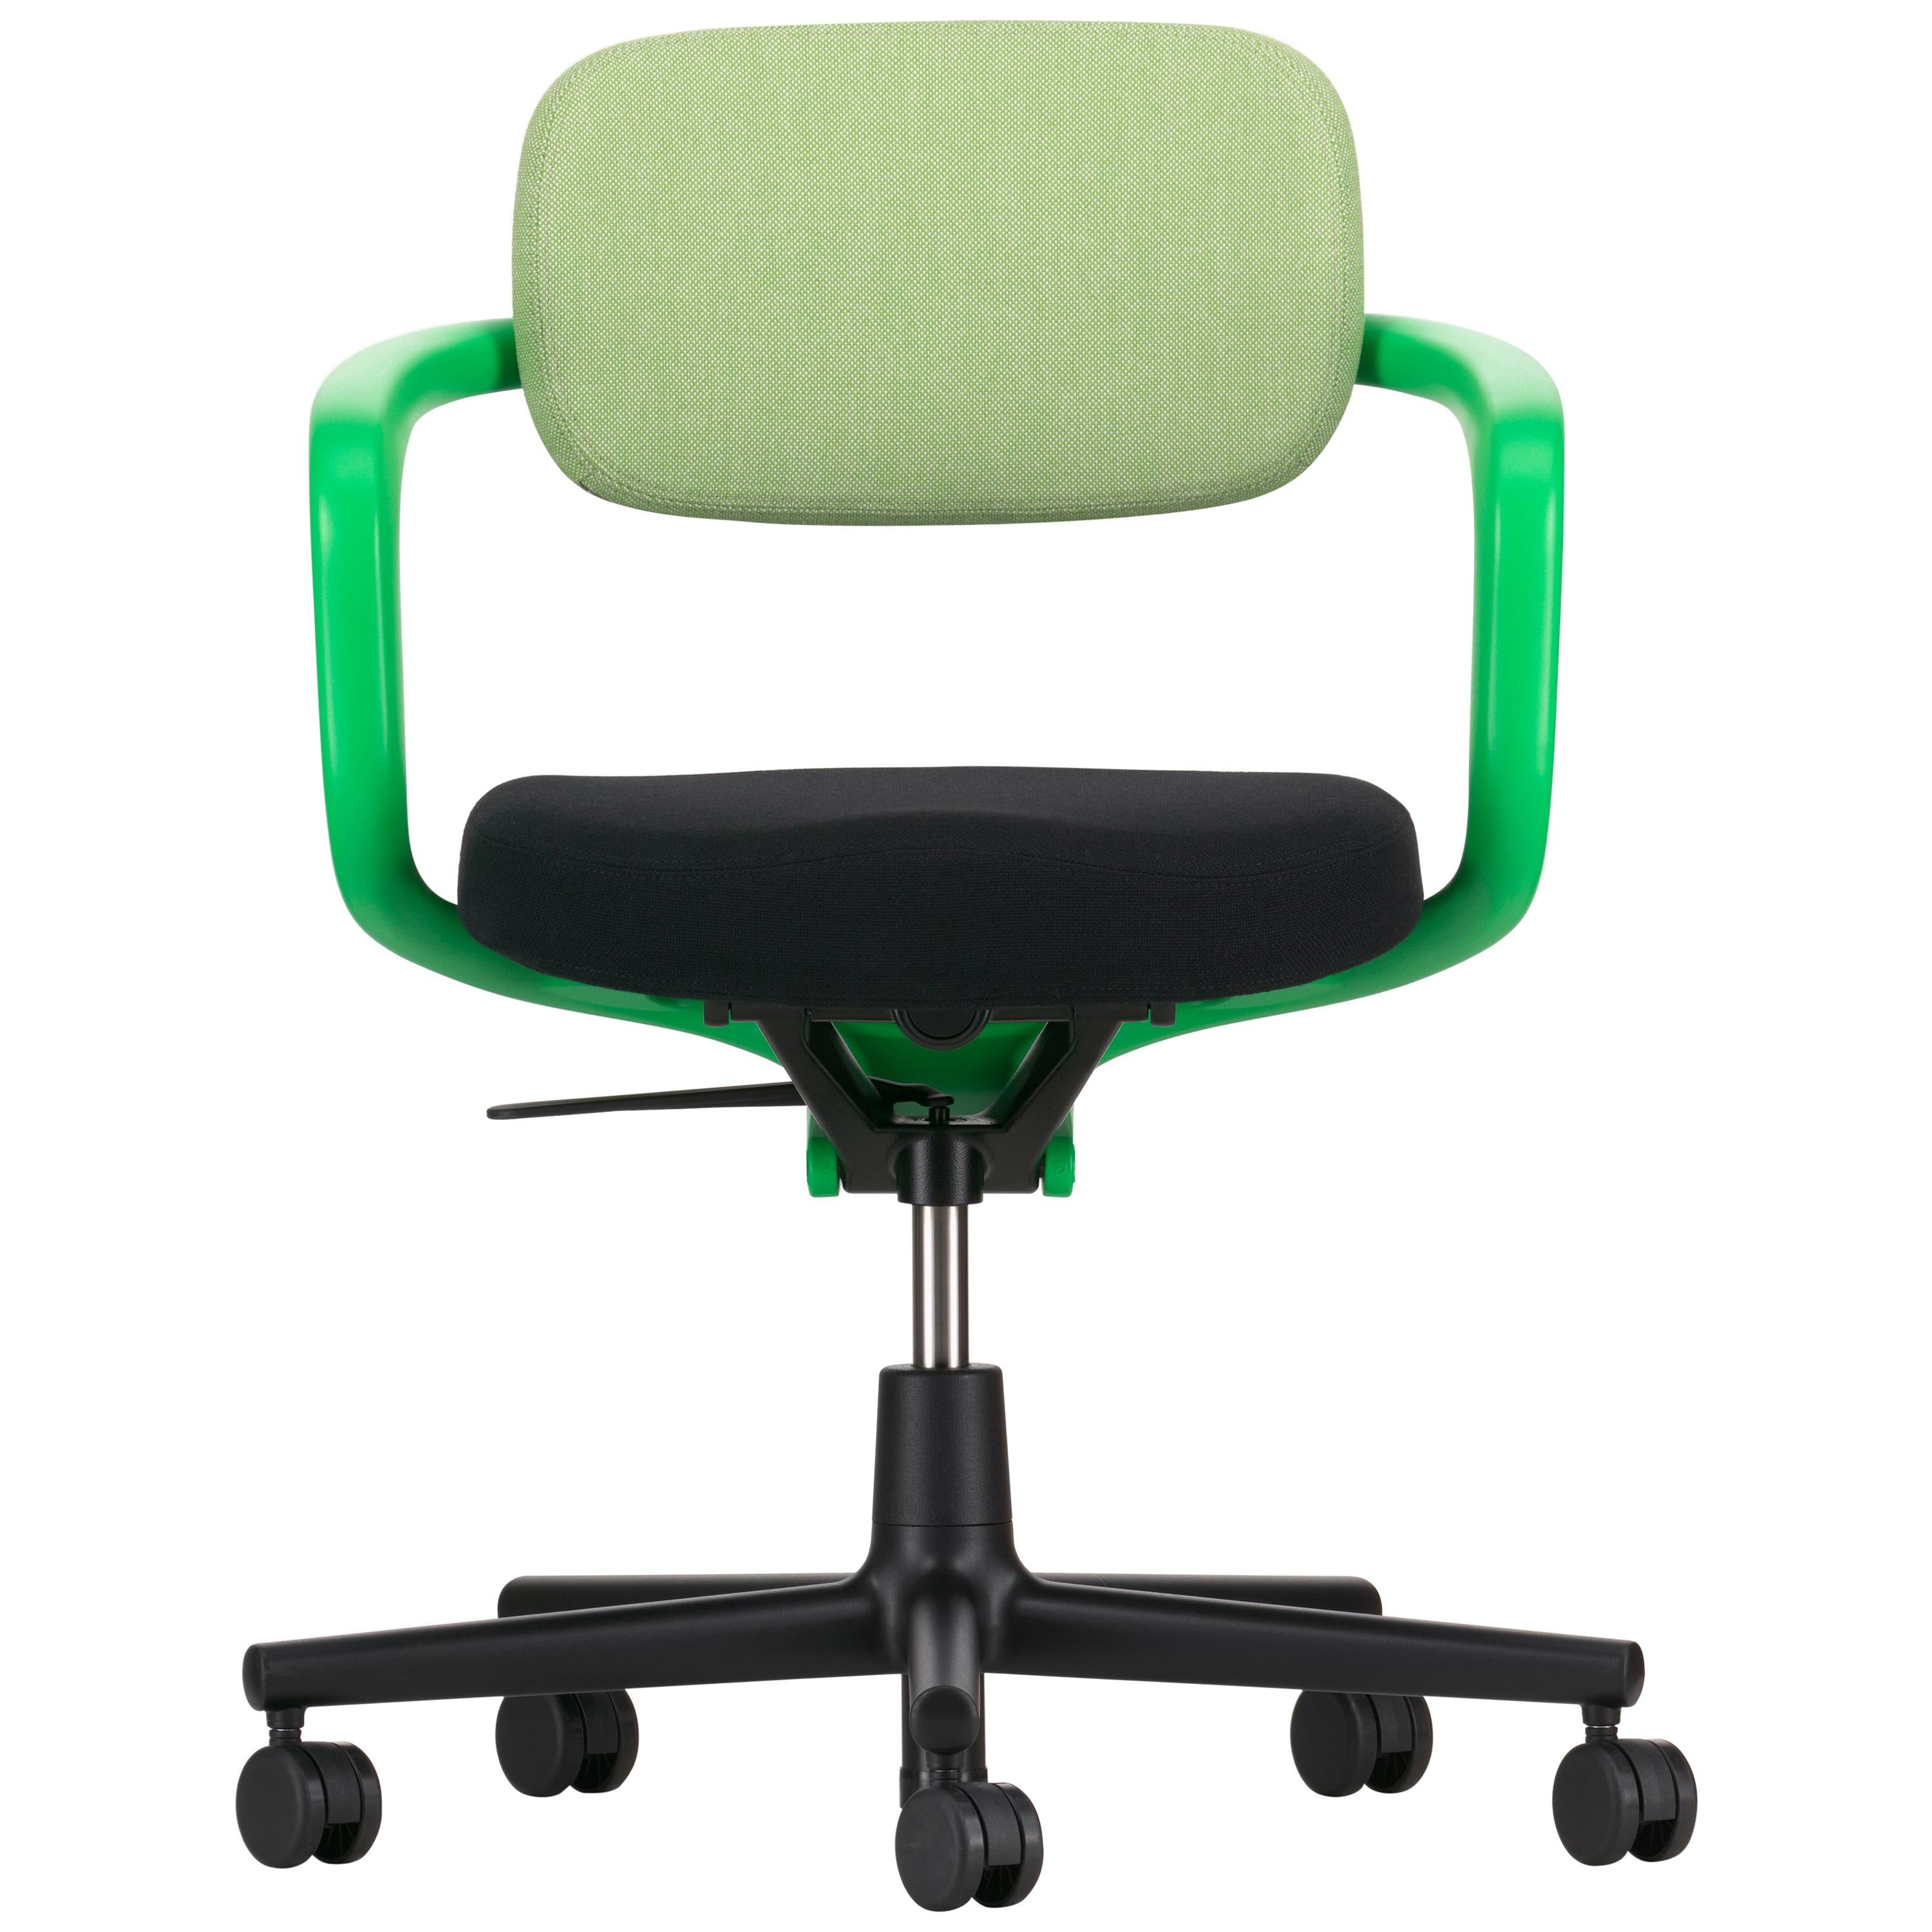 Vitra Allstar Chair in Grass Green & Ivory and Nero Hopsak by Konstantin Grcic